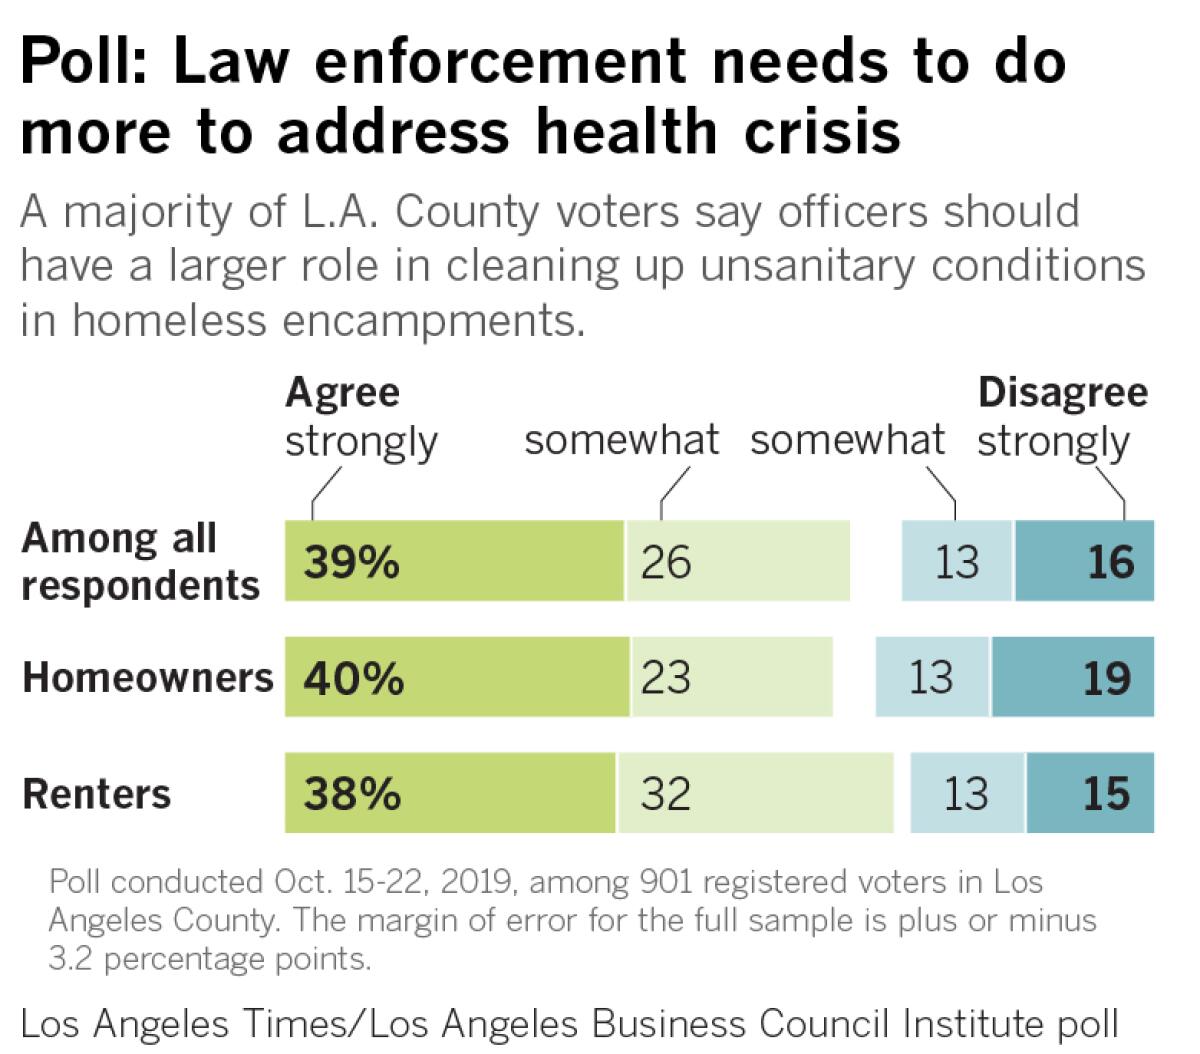 A majority of L.A. County voters say officers should have a larger role in cleaning up unsanitary conditions in homeless encampments.